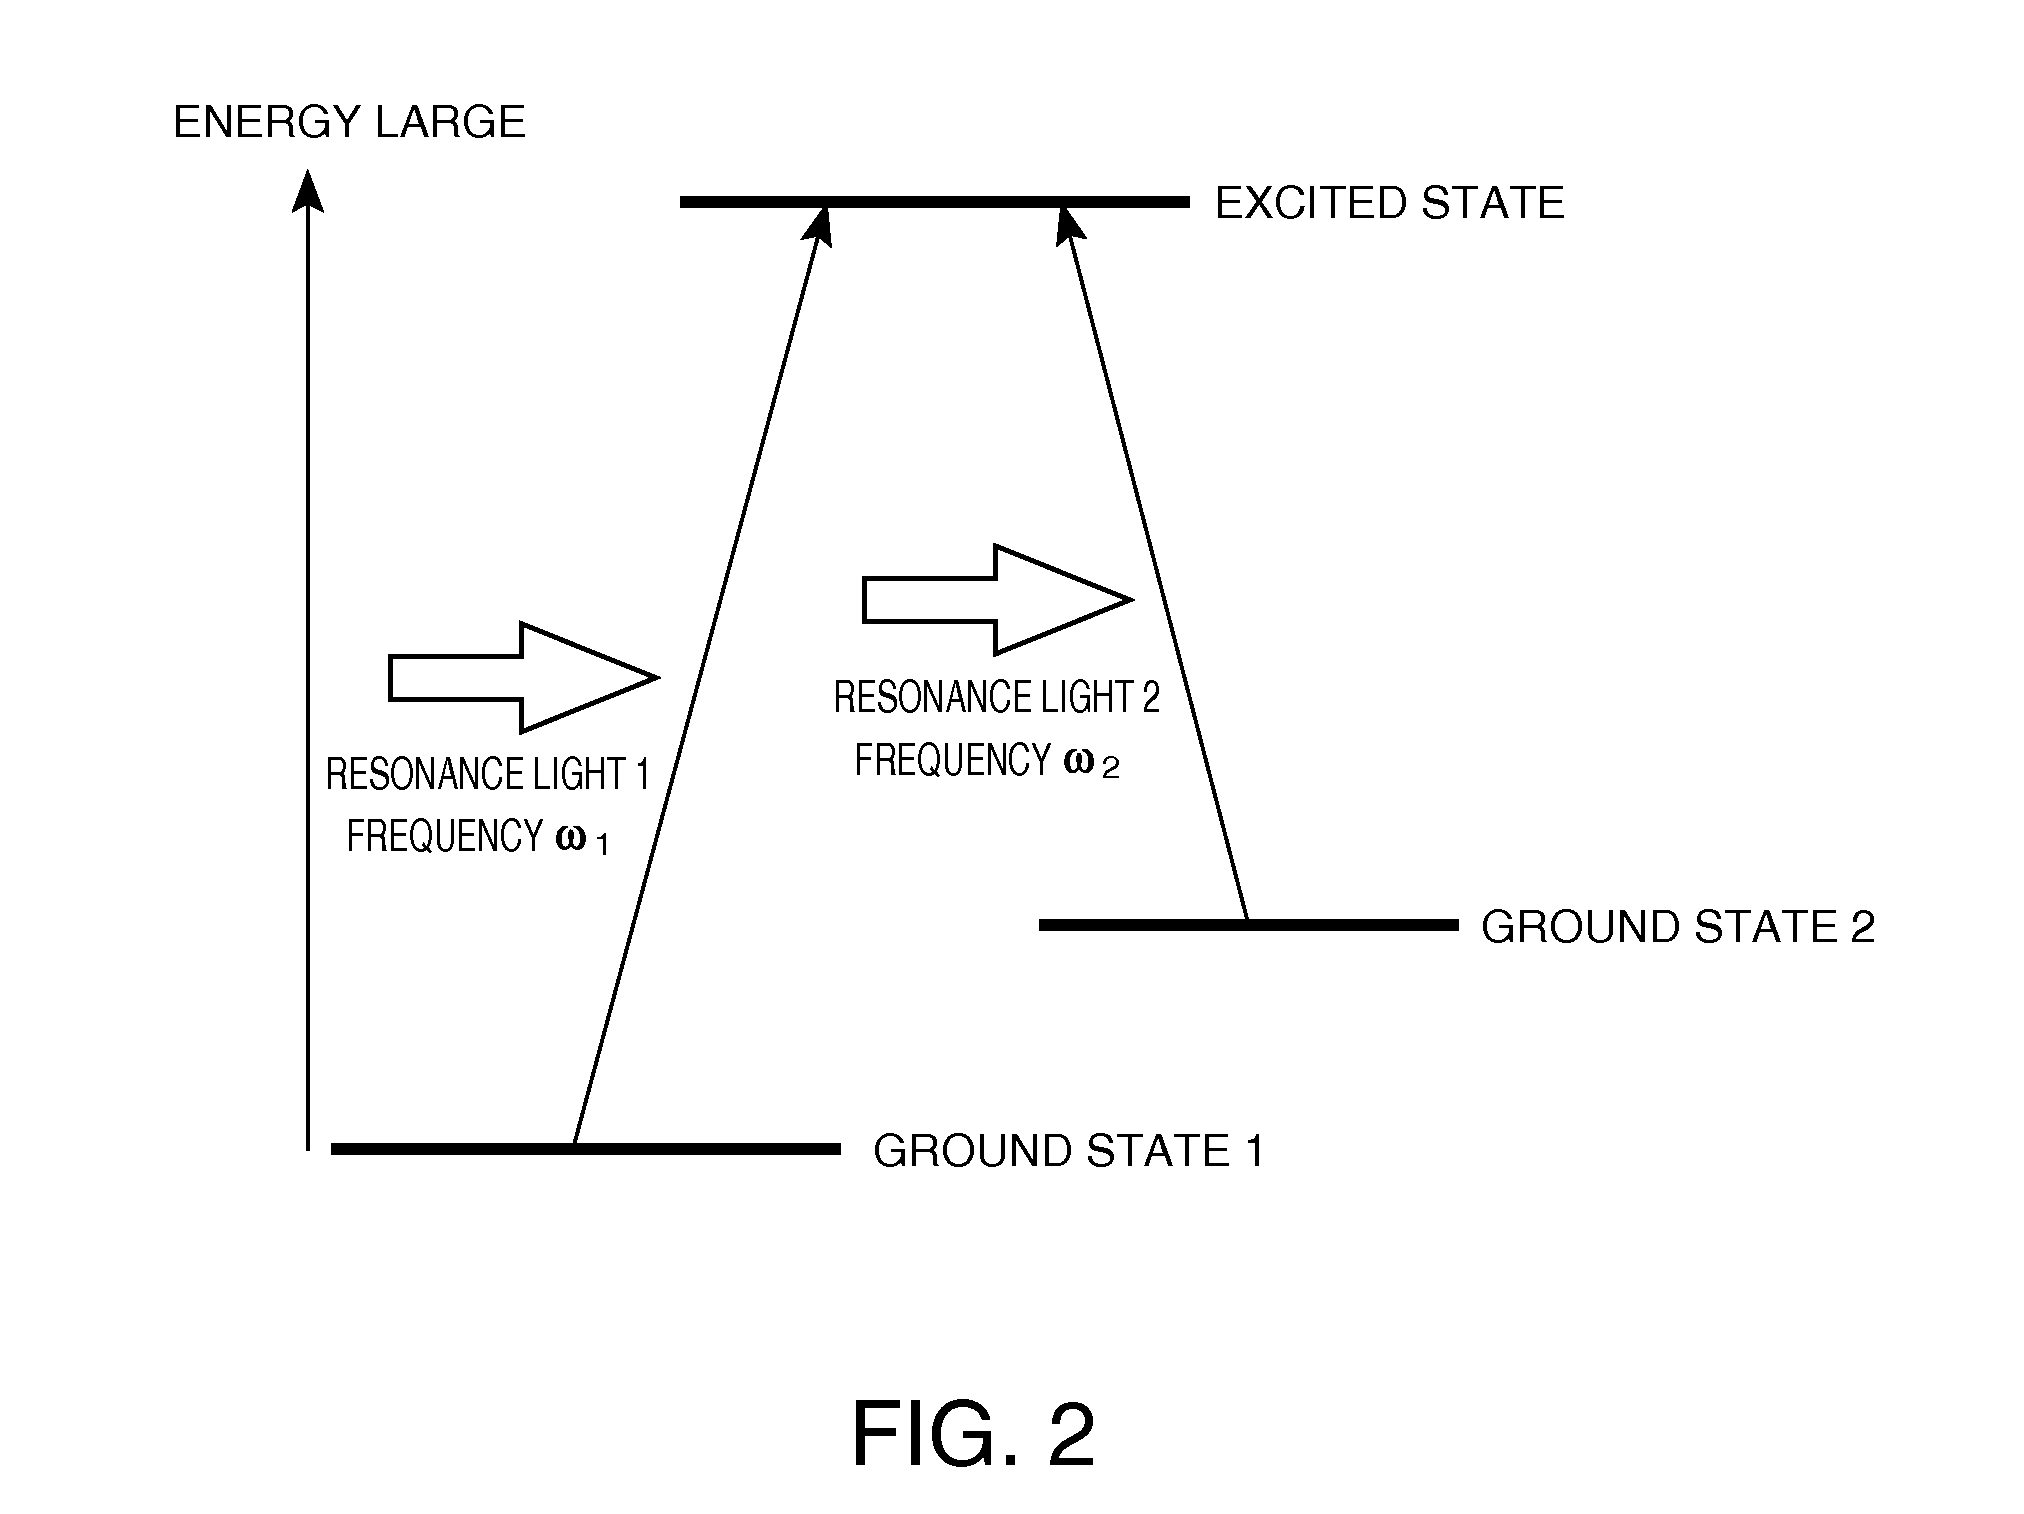 Gas cell unit, atomic oscillator and electronic apparatus